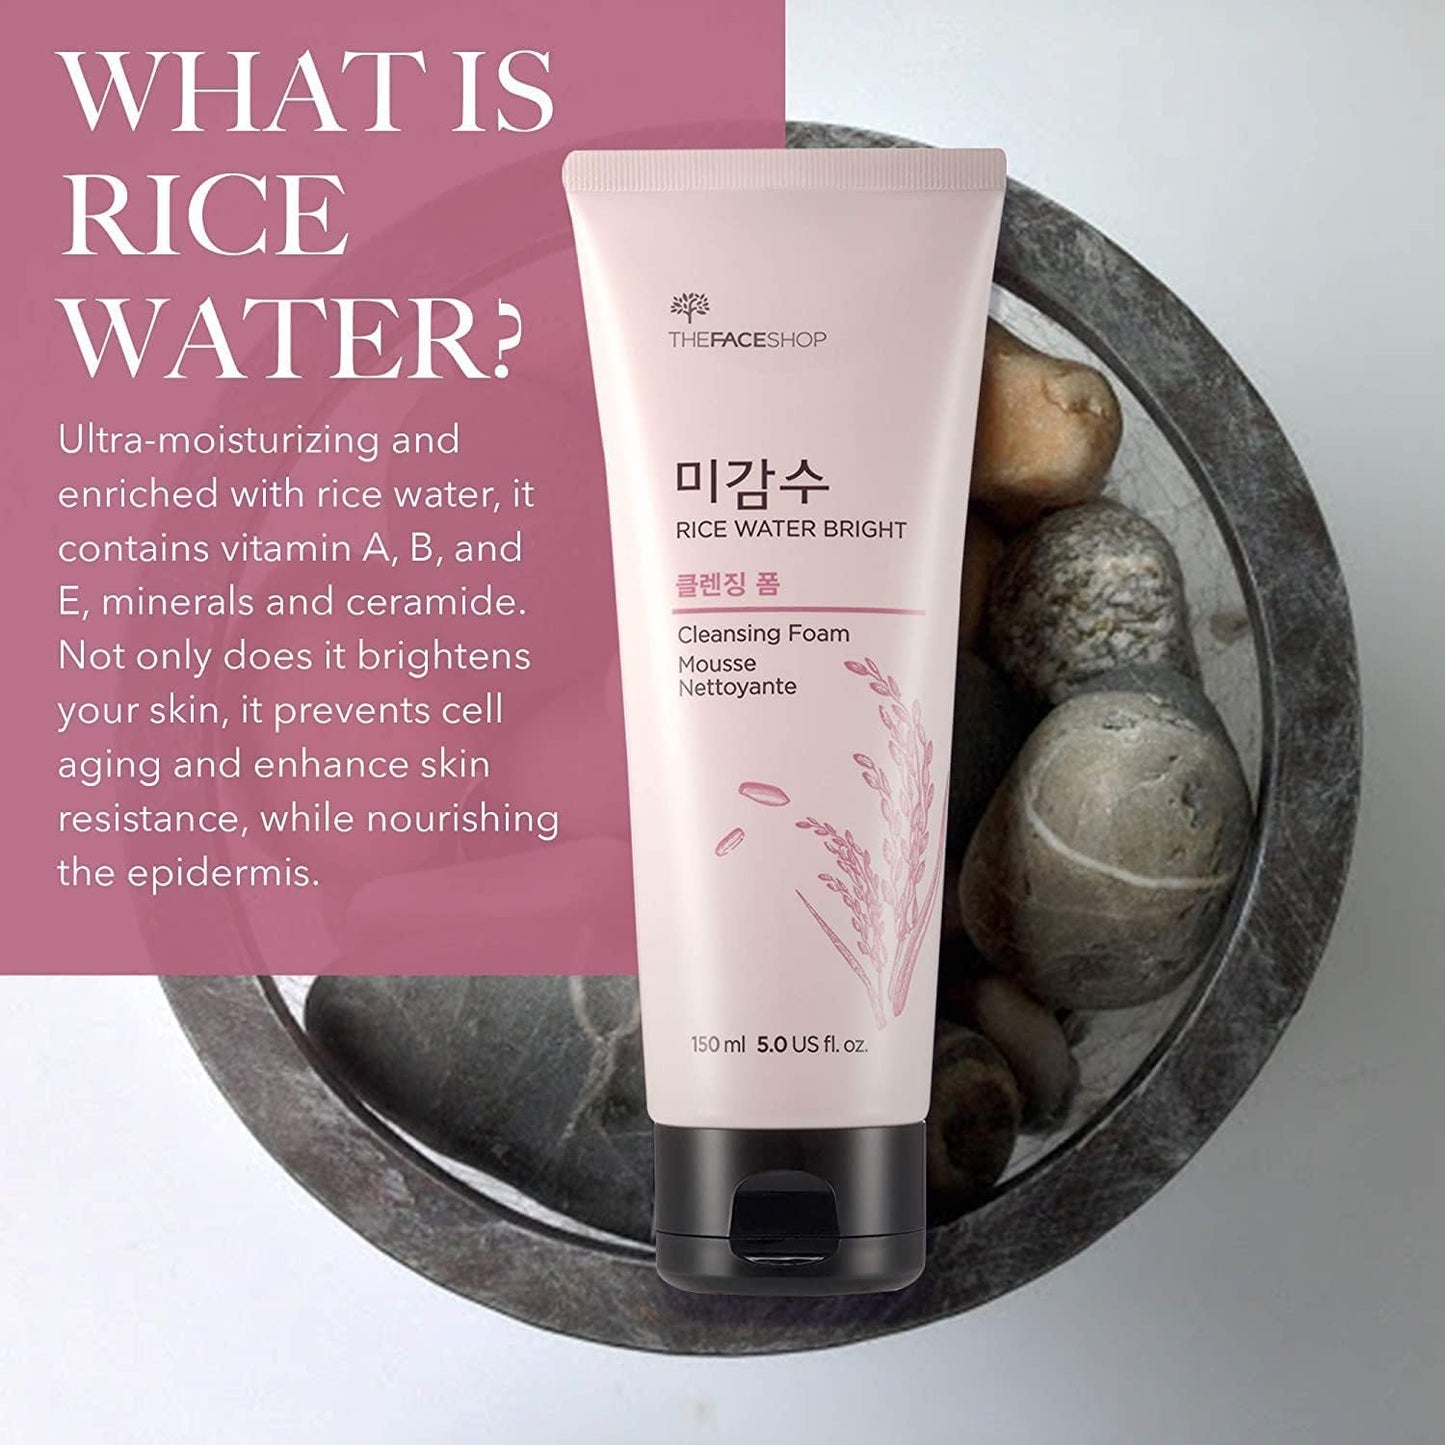 THE FACE SHOP Rice Water Bright Cleansing Foam